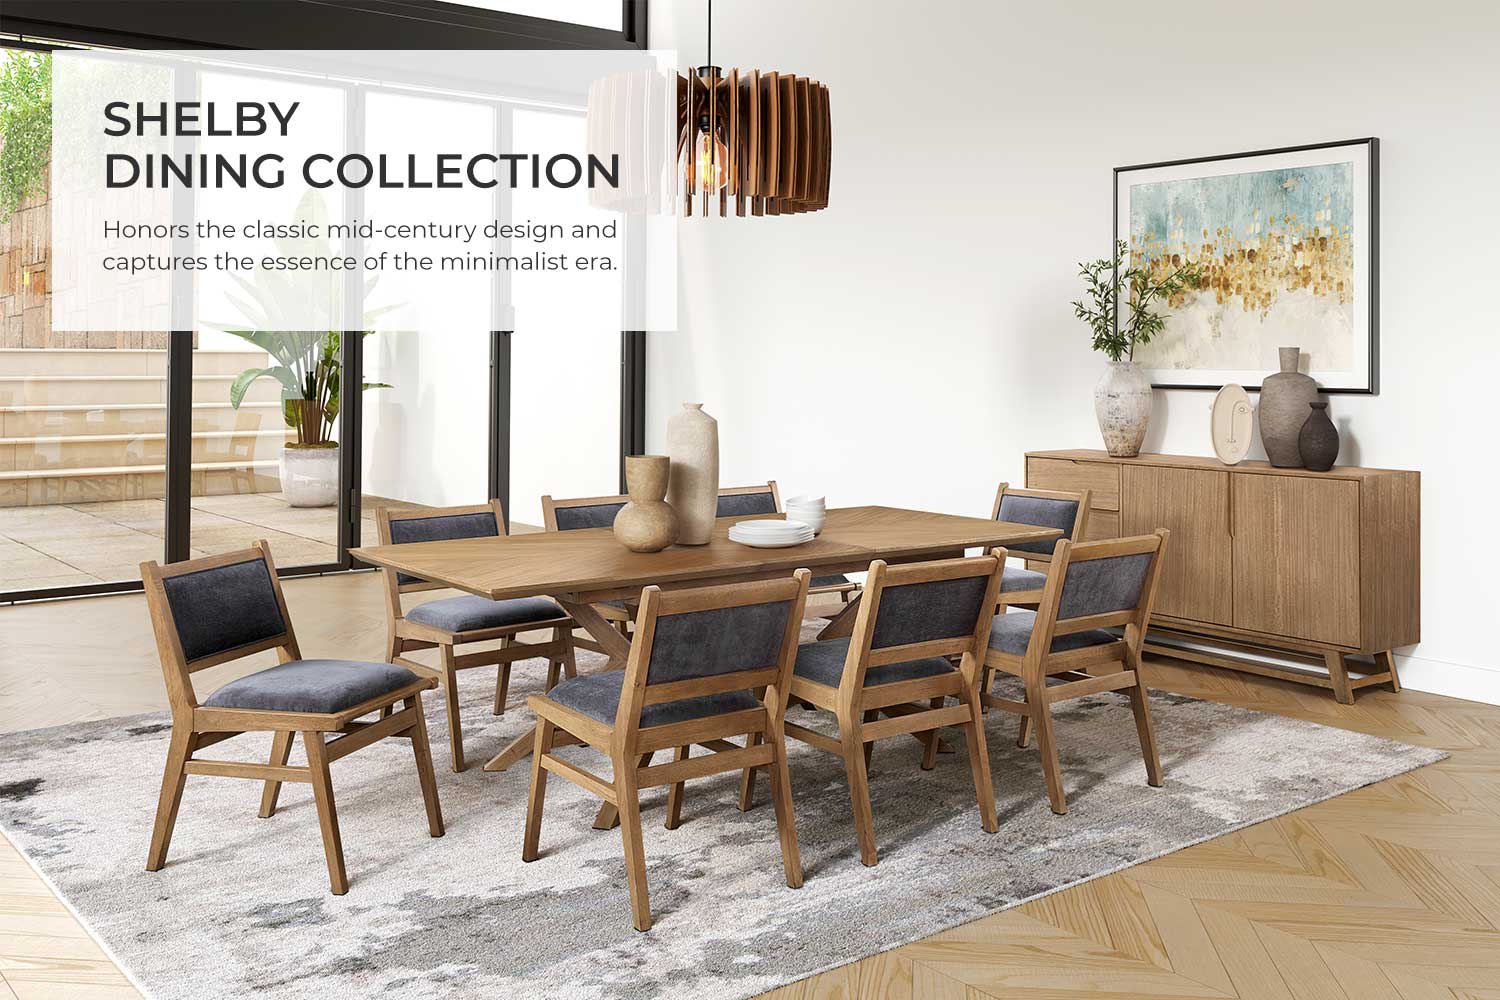 Shelby Dining Collection